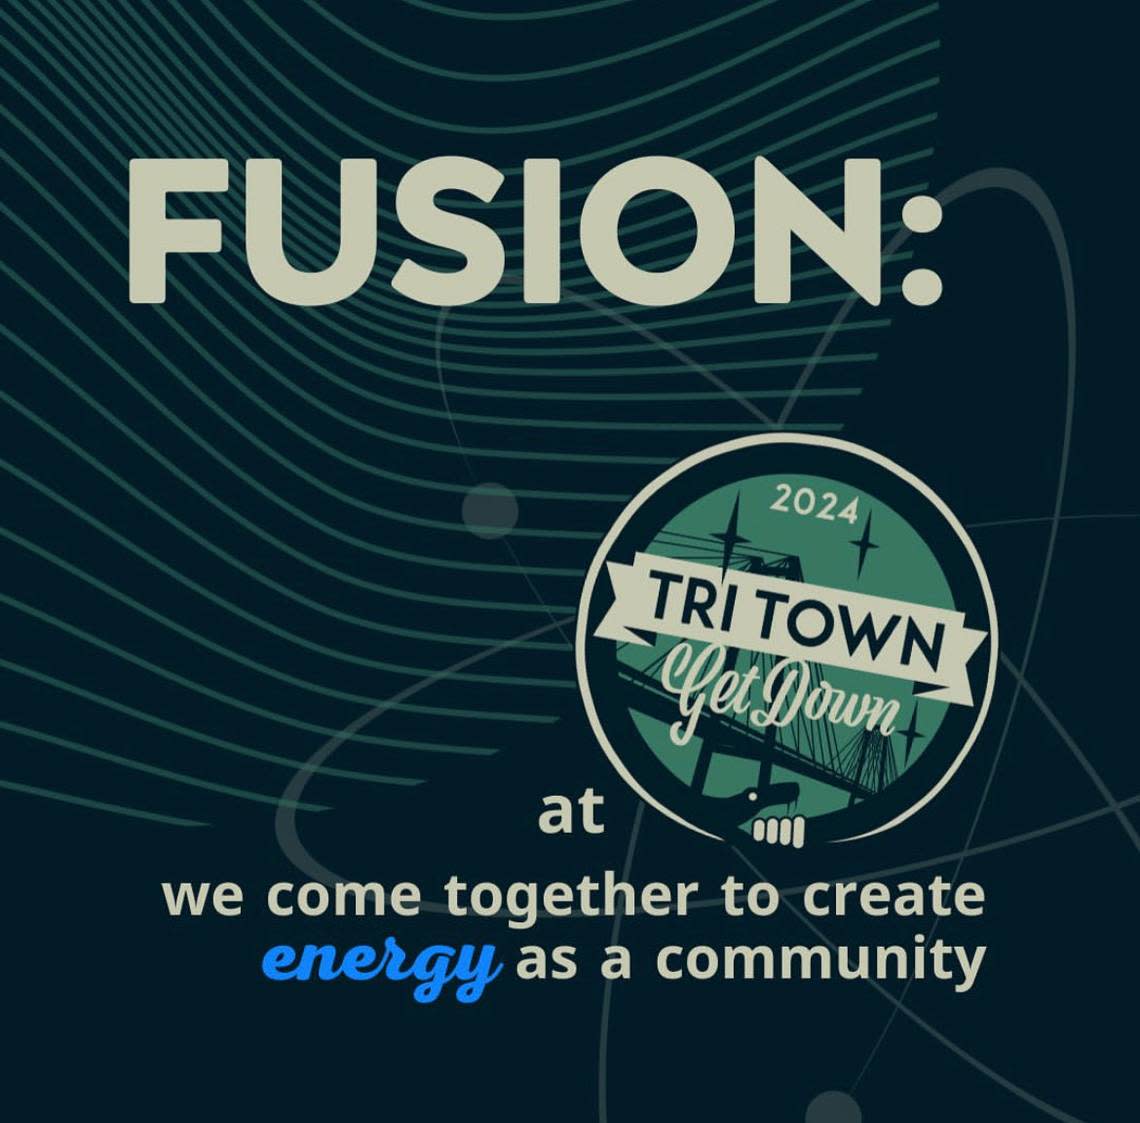 But at Tri Town Get Down, people come together to create energy as a community. 